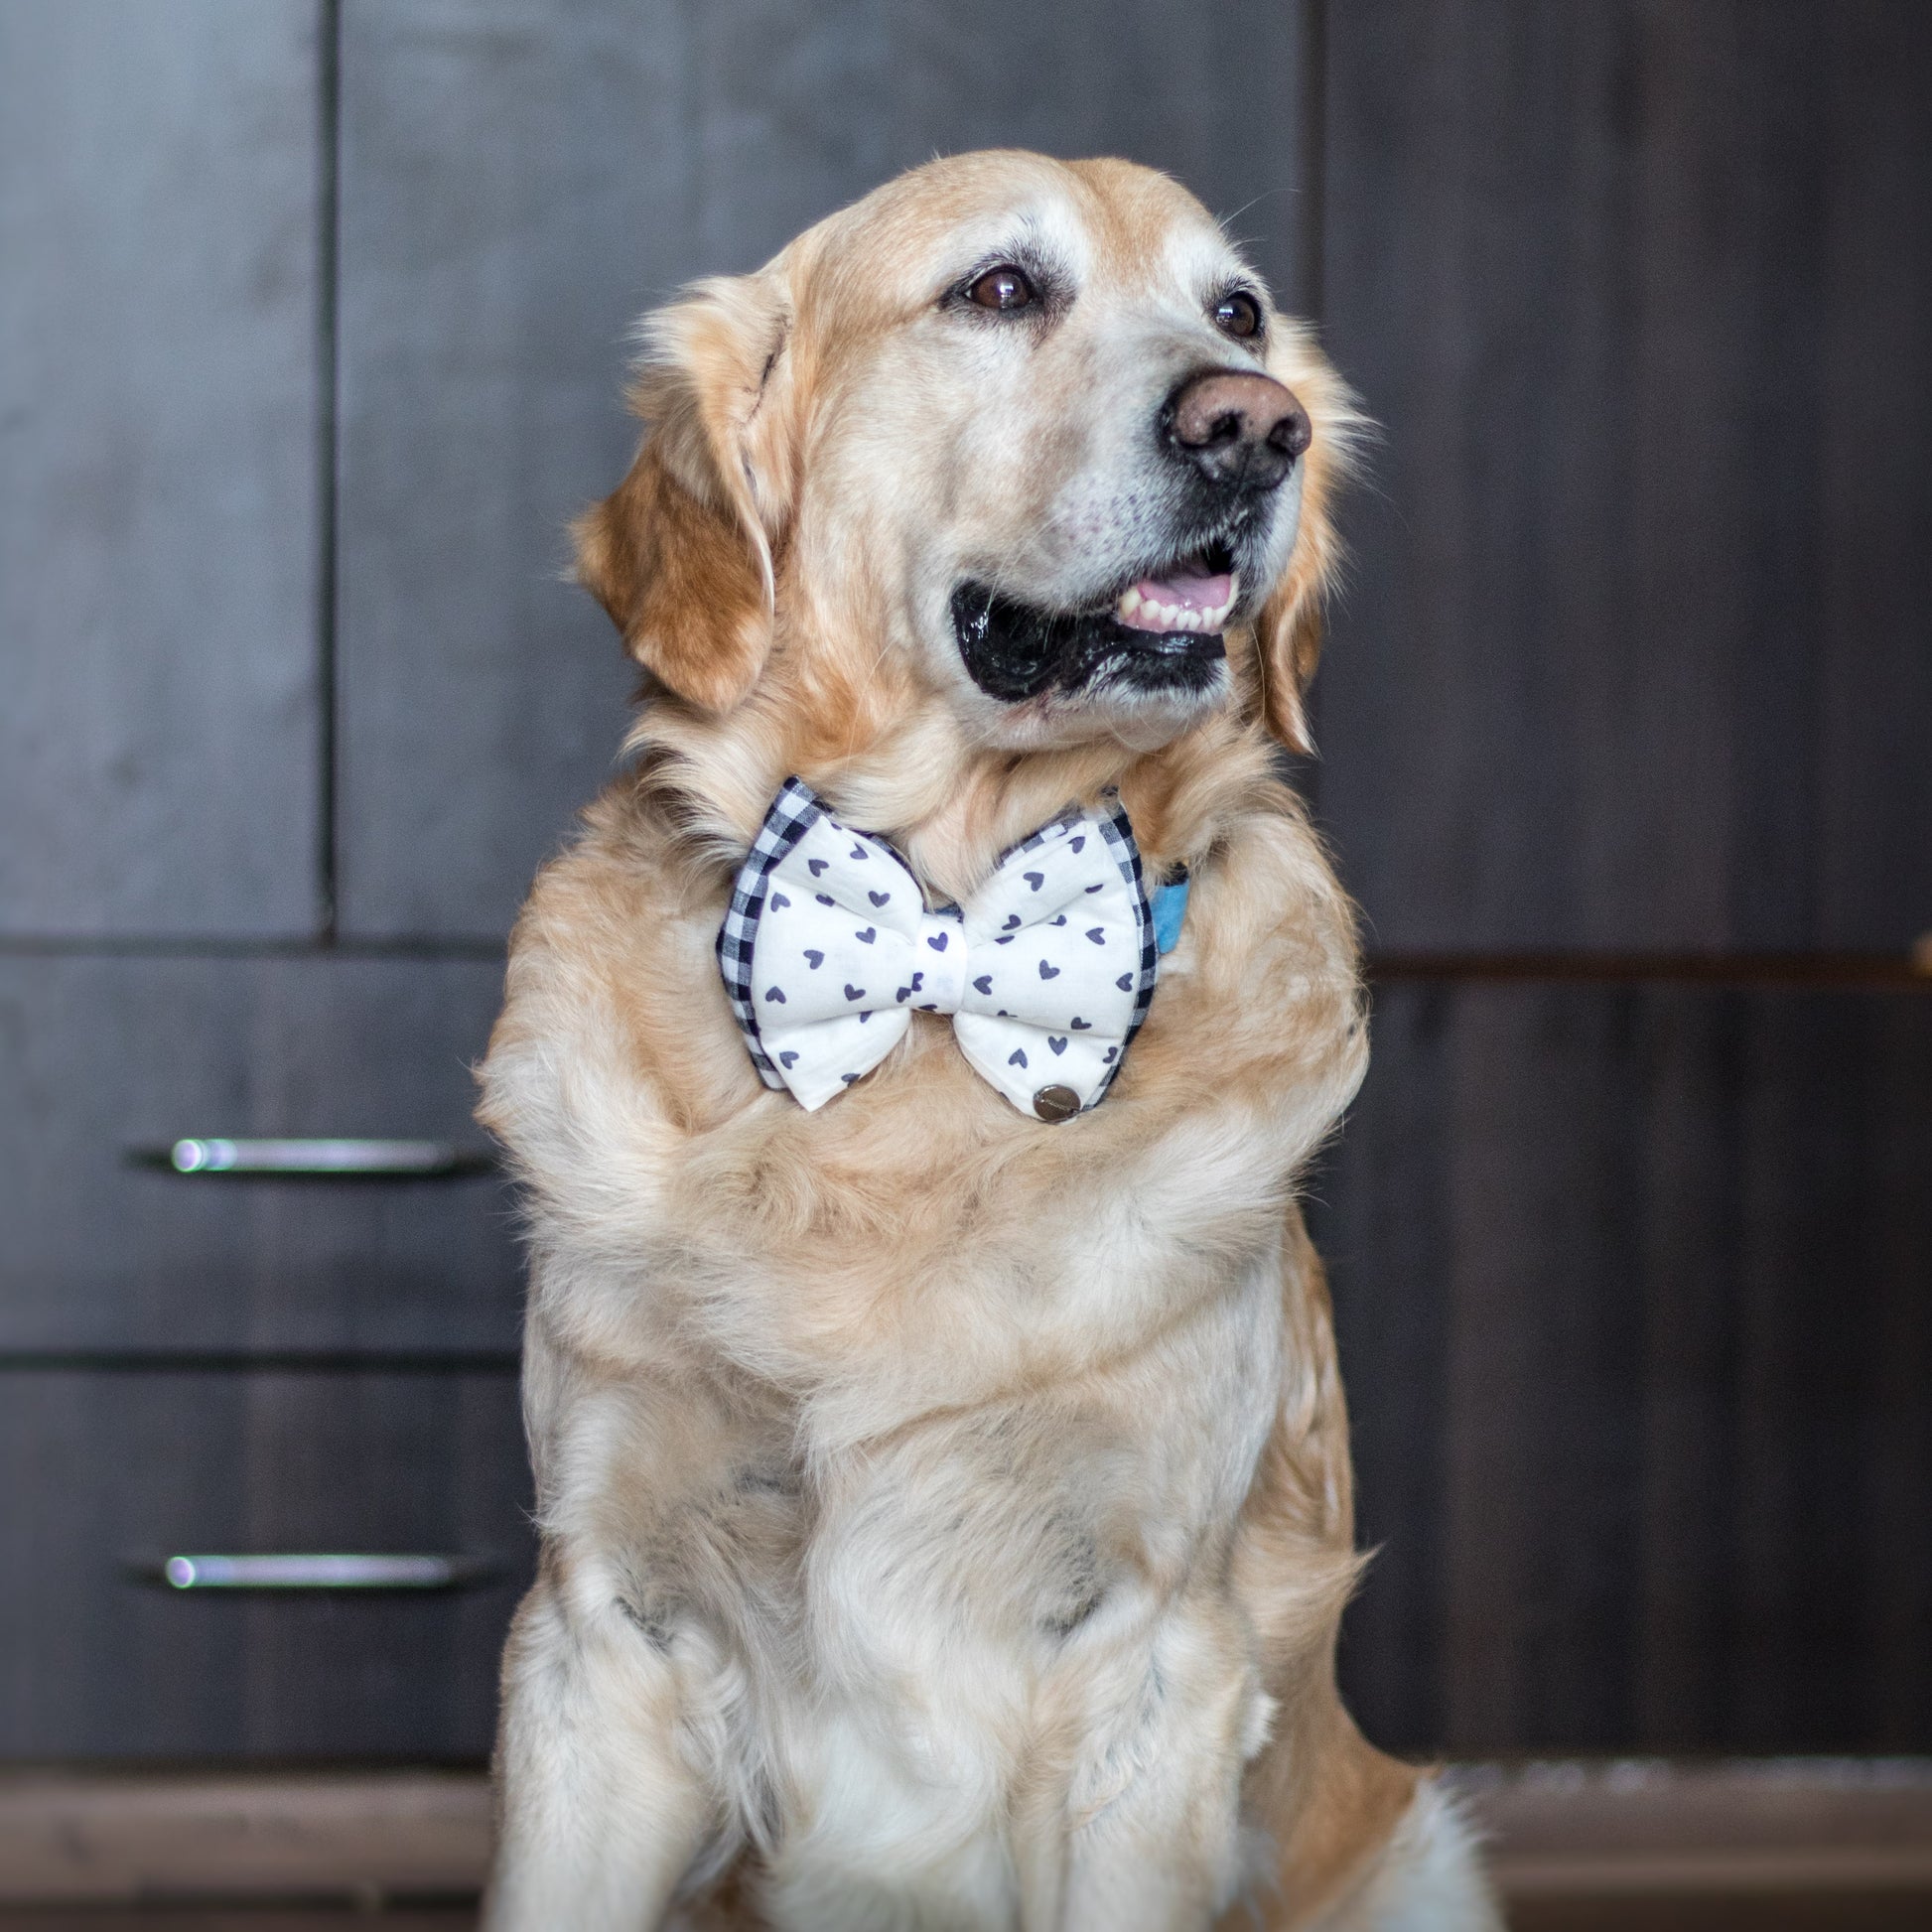 Black dog bow tie| dog bow ties online India 